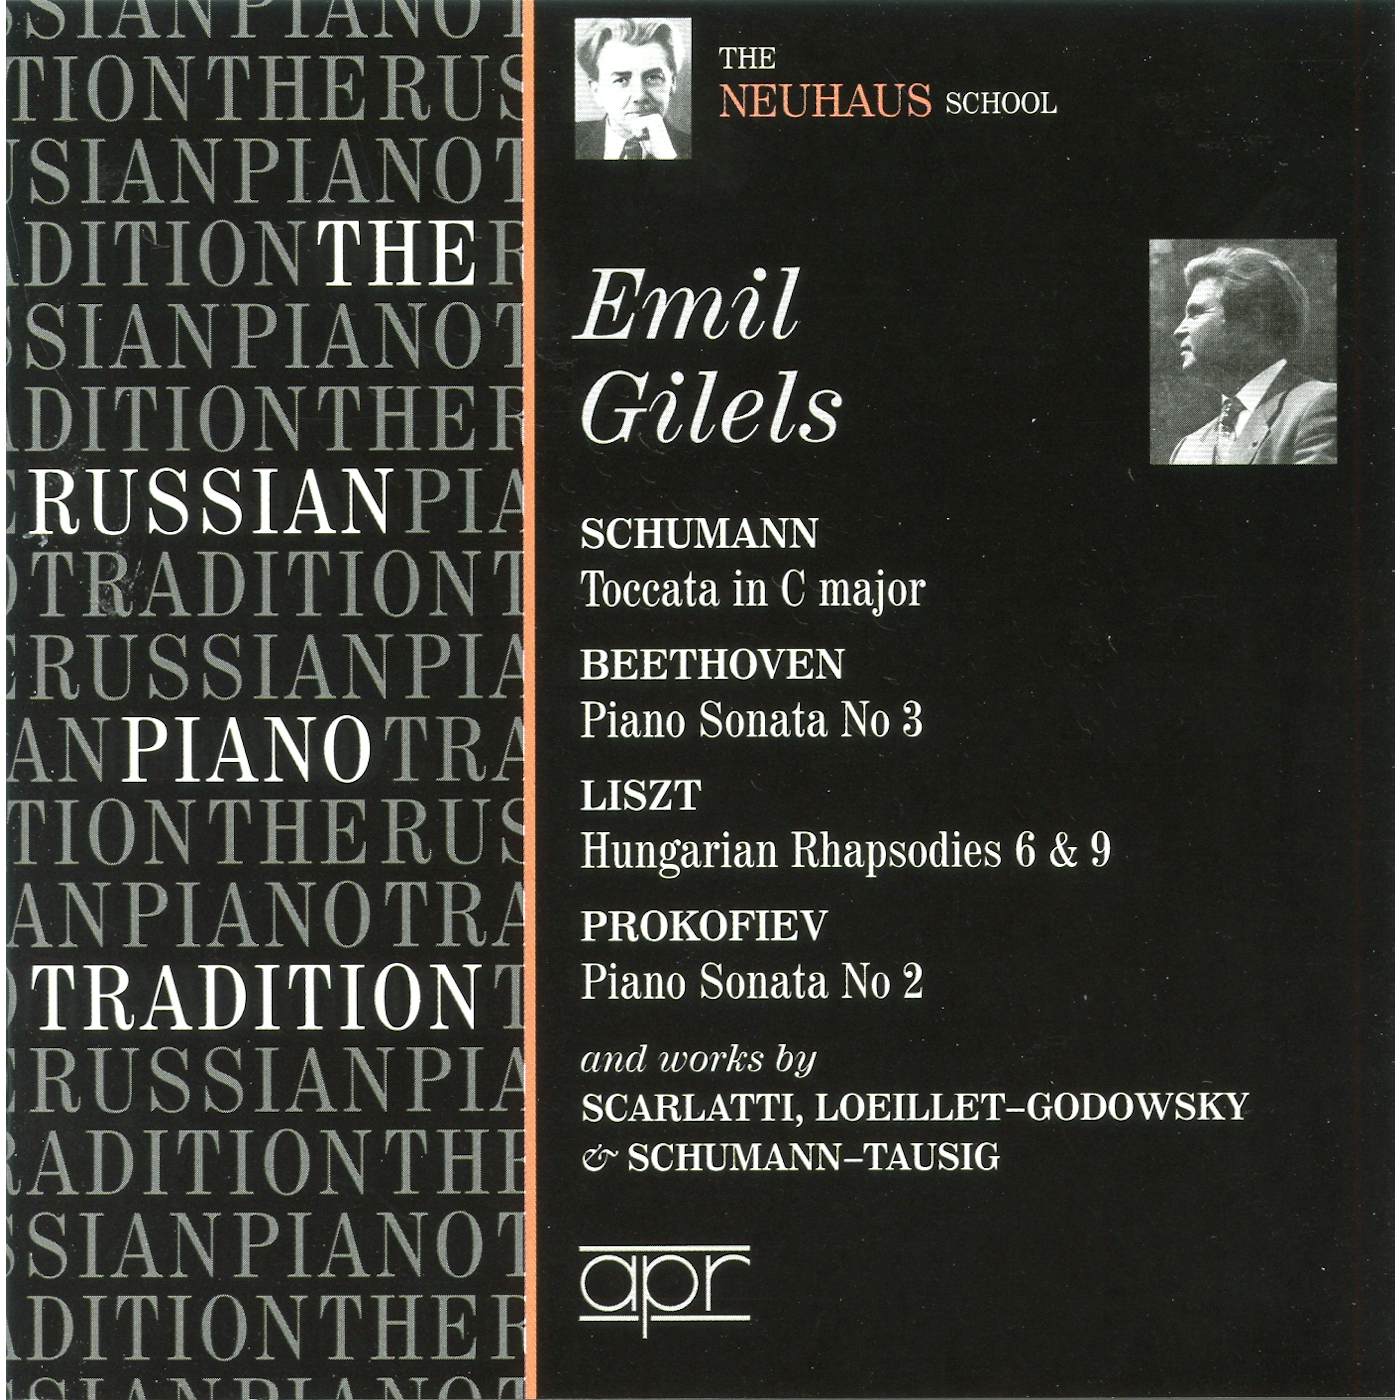 Emil Gilels RUSSIAN PIANO TRADITION CD